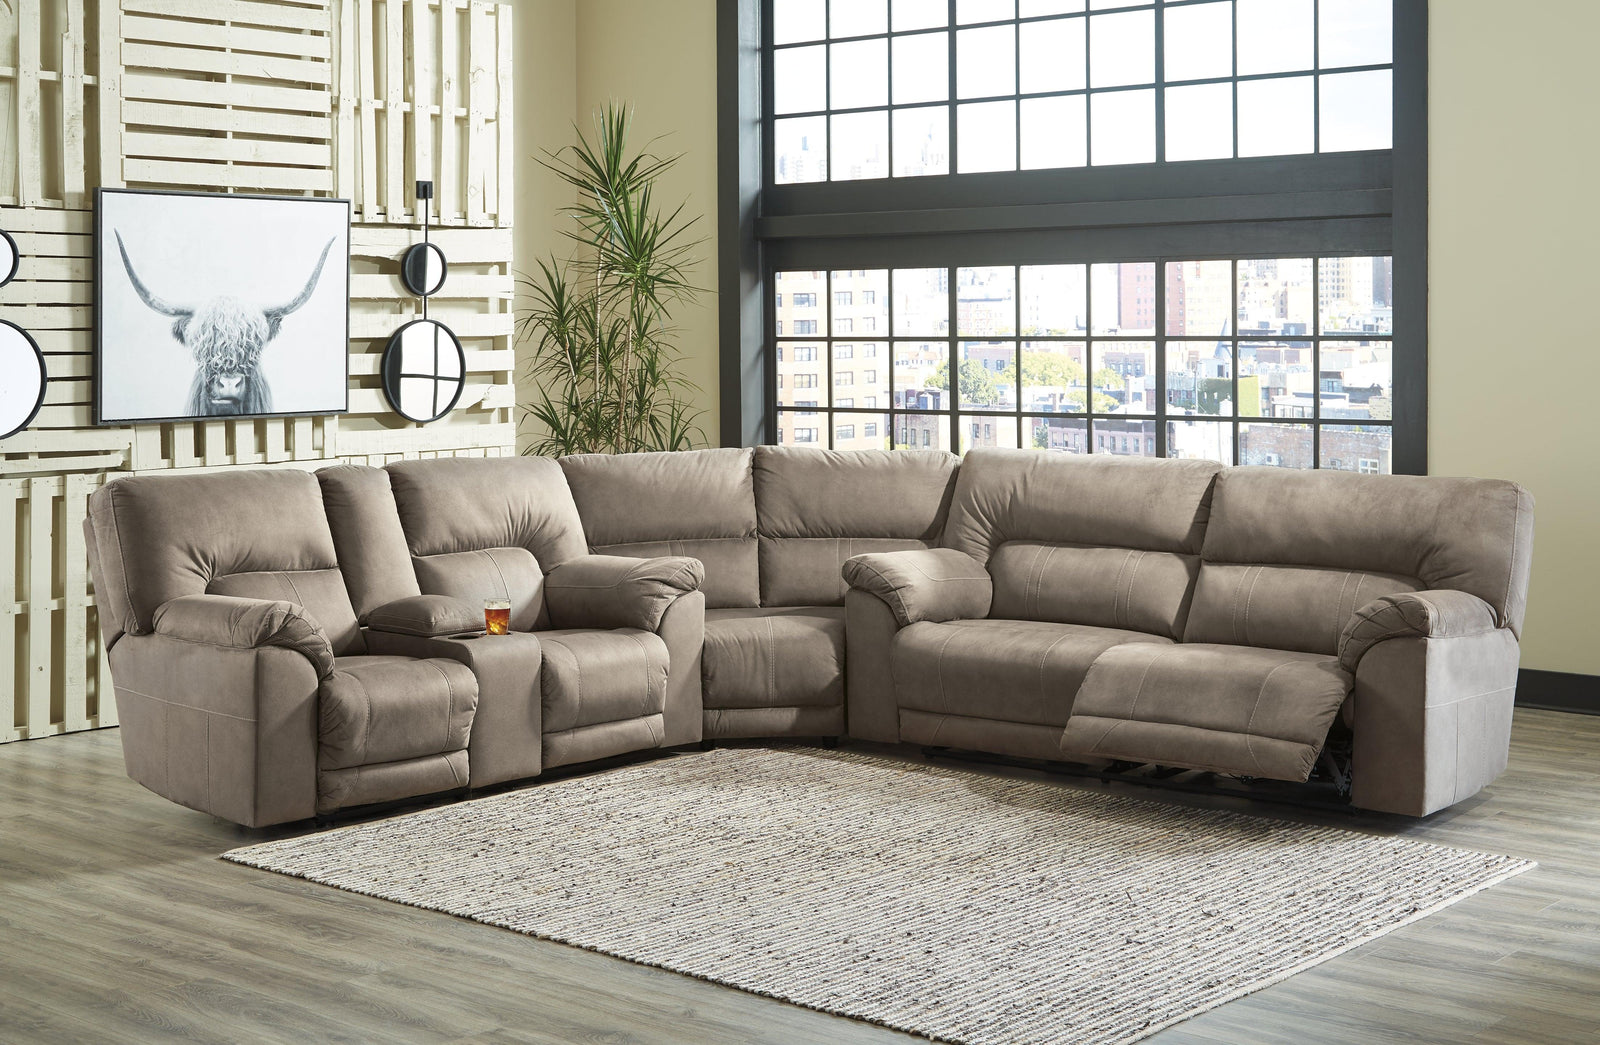 Cavalcade Slate Faux Leather 3-Piece Reclining Sectional